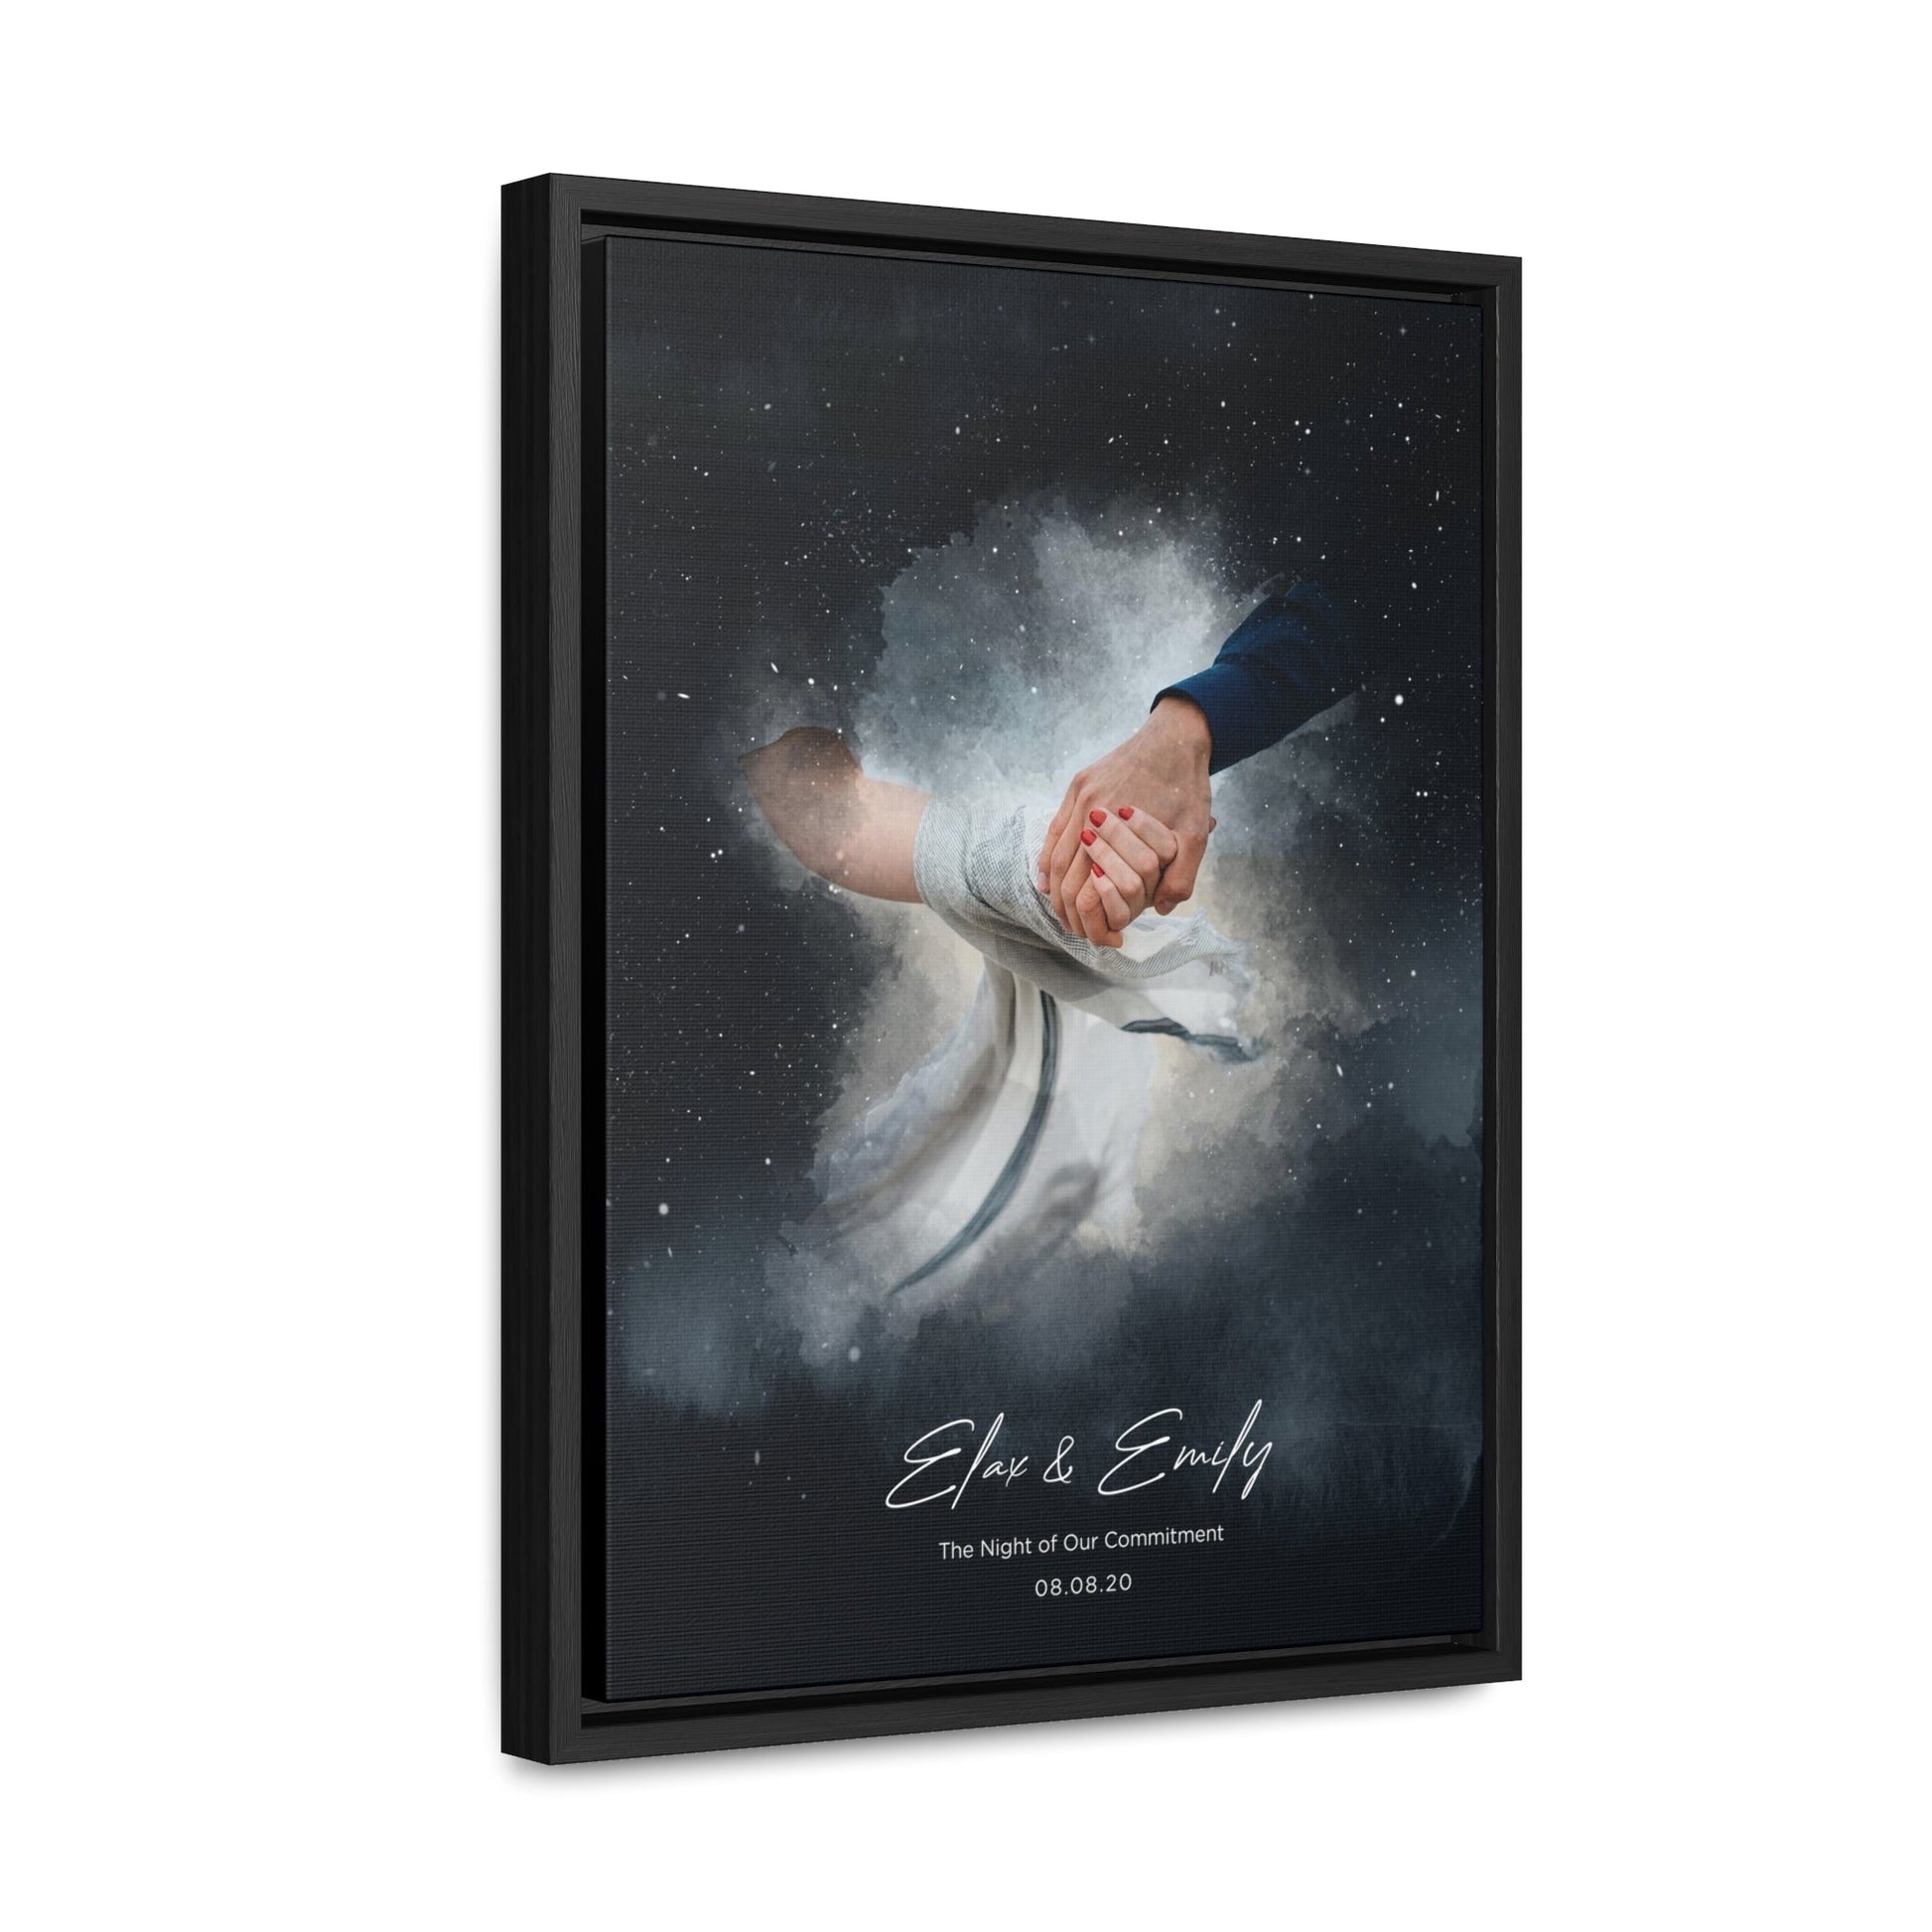 Custom star map gift: Night sky in a stitched canvas frame.